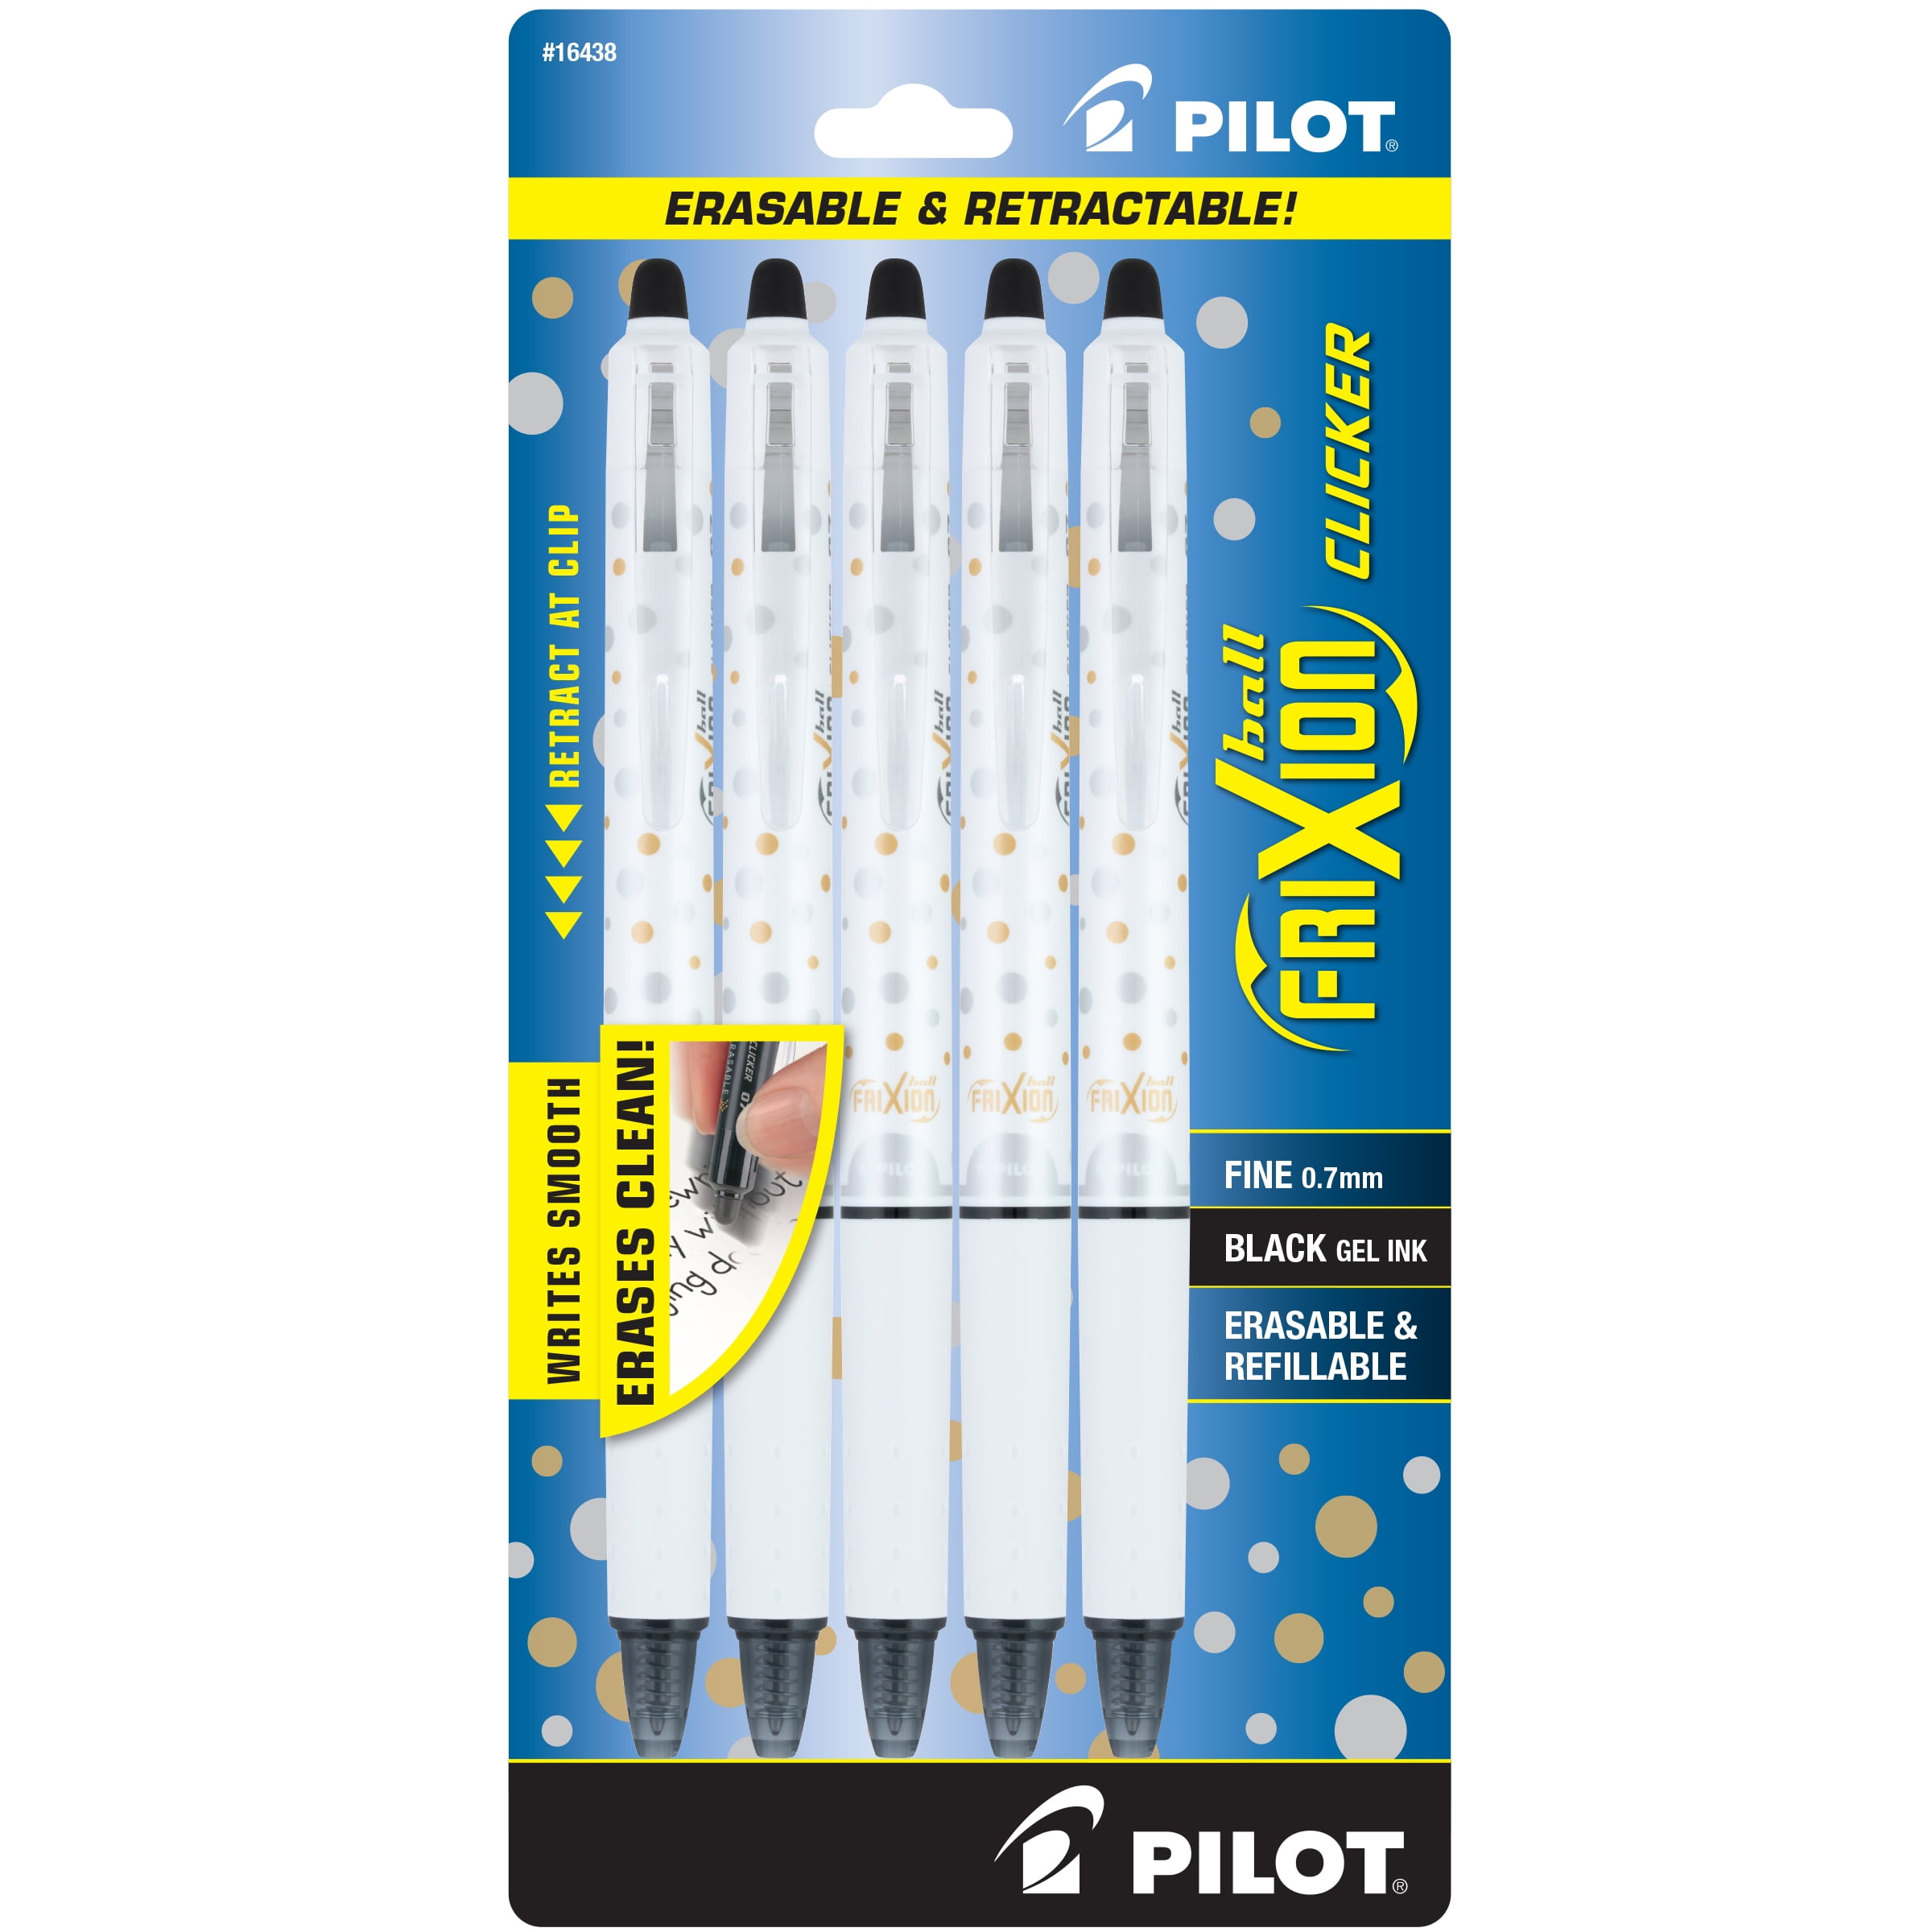  Pilot FriXion Clicker Retractable Gel Ink Pens, Eraseable, Fine  Point 0.7mm, Navy Blue Ink, Pack of 3 with Bundle Packs of Refills : Office  Products